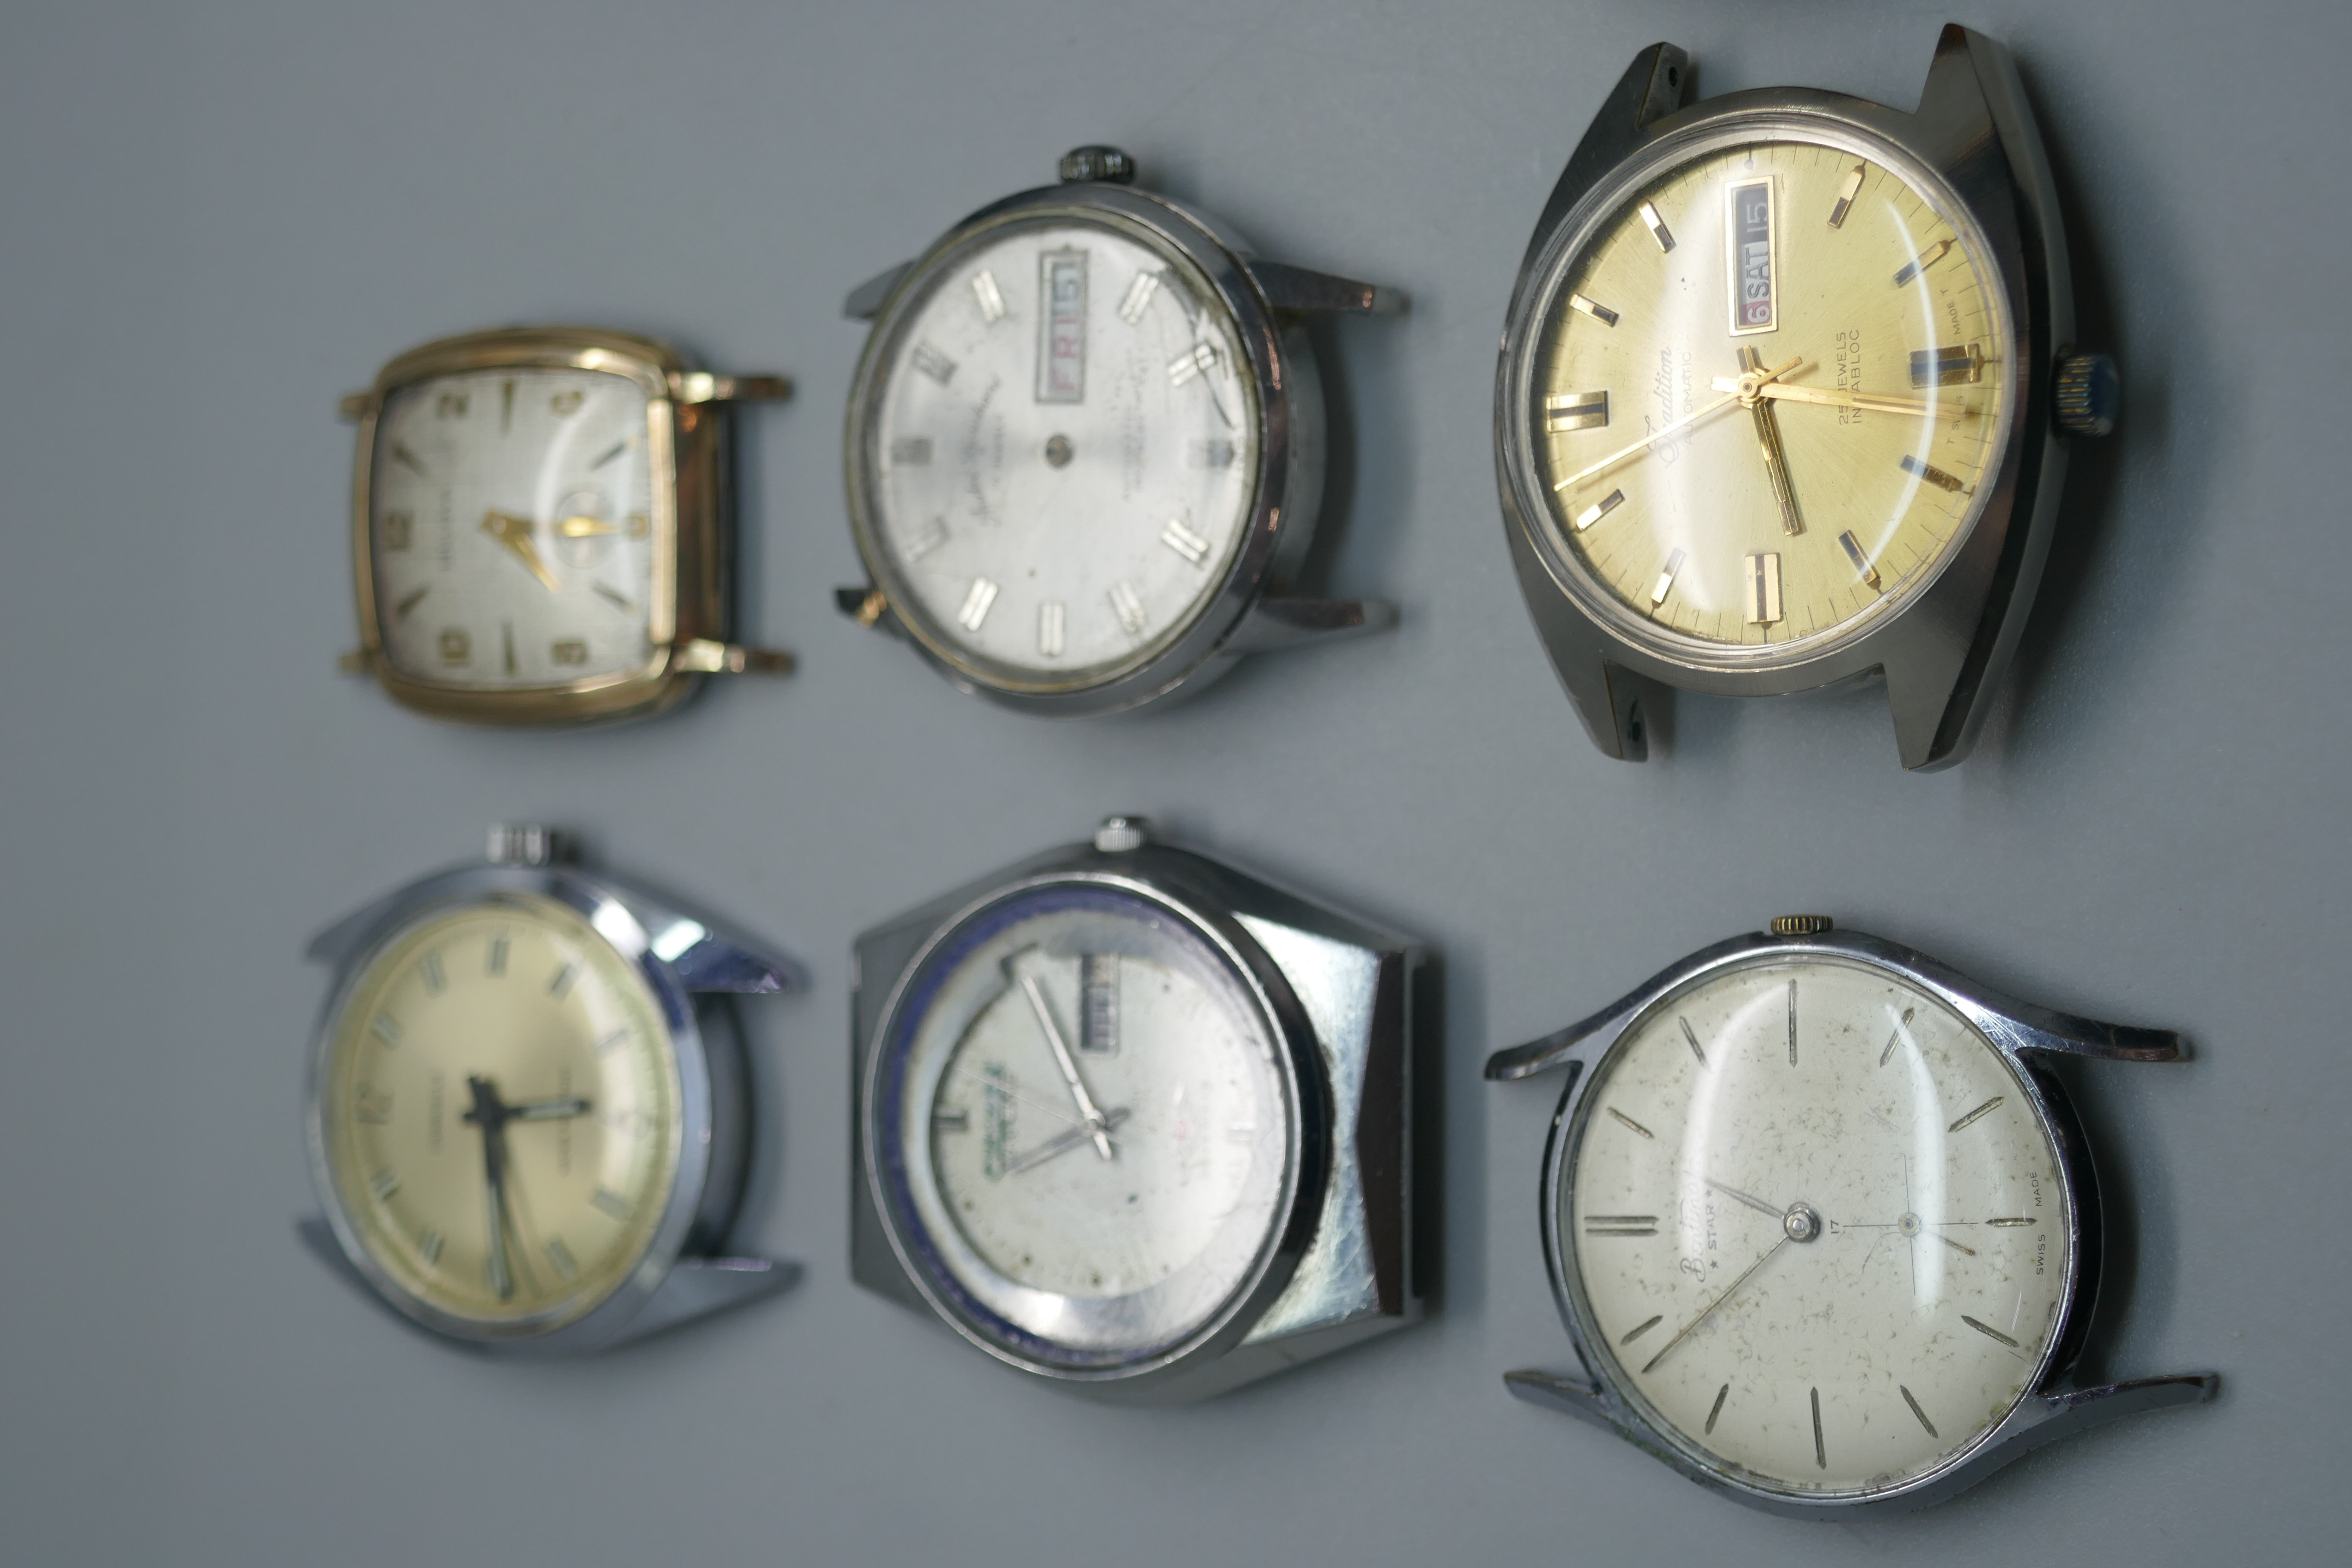 A collection of mechanical wristwatches including Bulova lacking crown, Caravelle, Bentima, etc. - Image 2 of 3